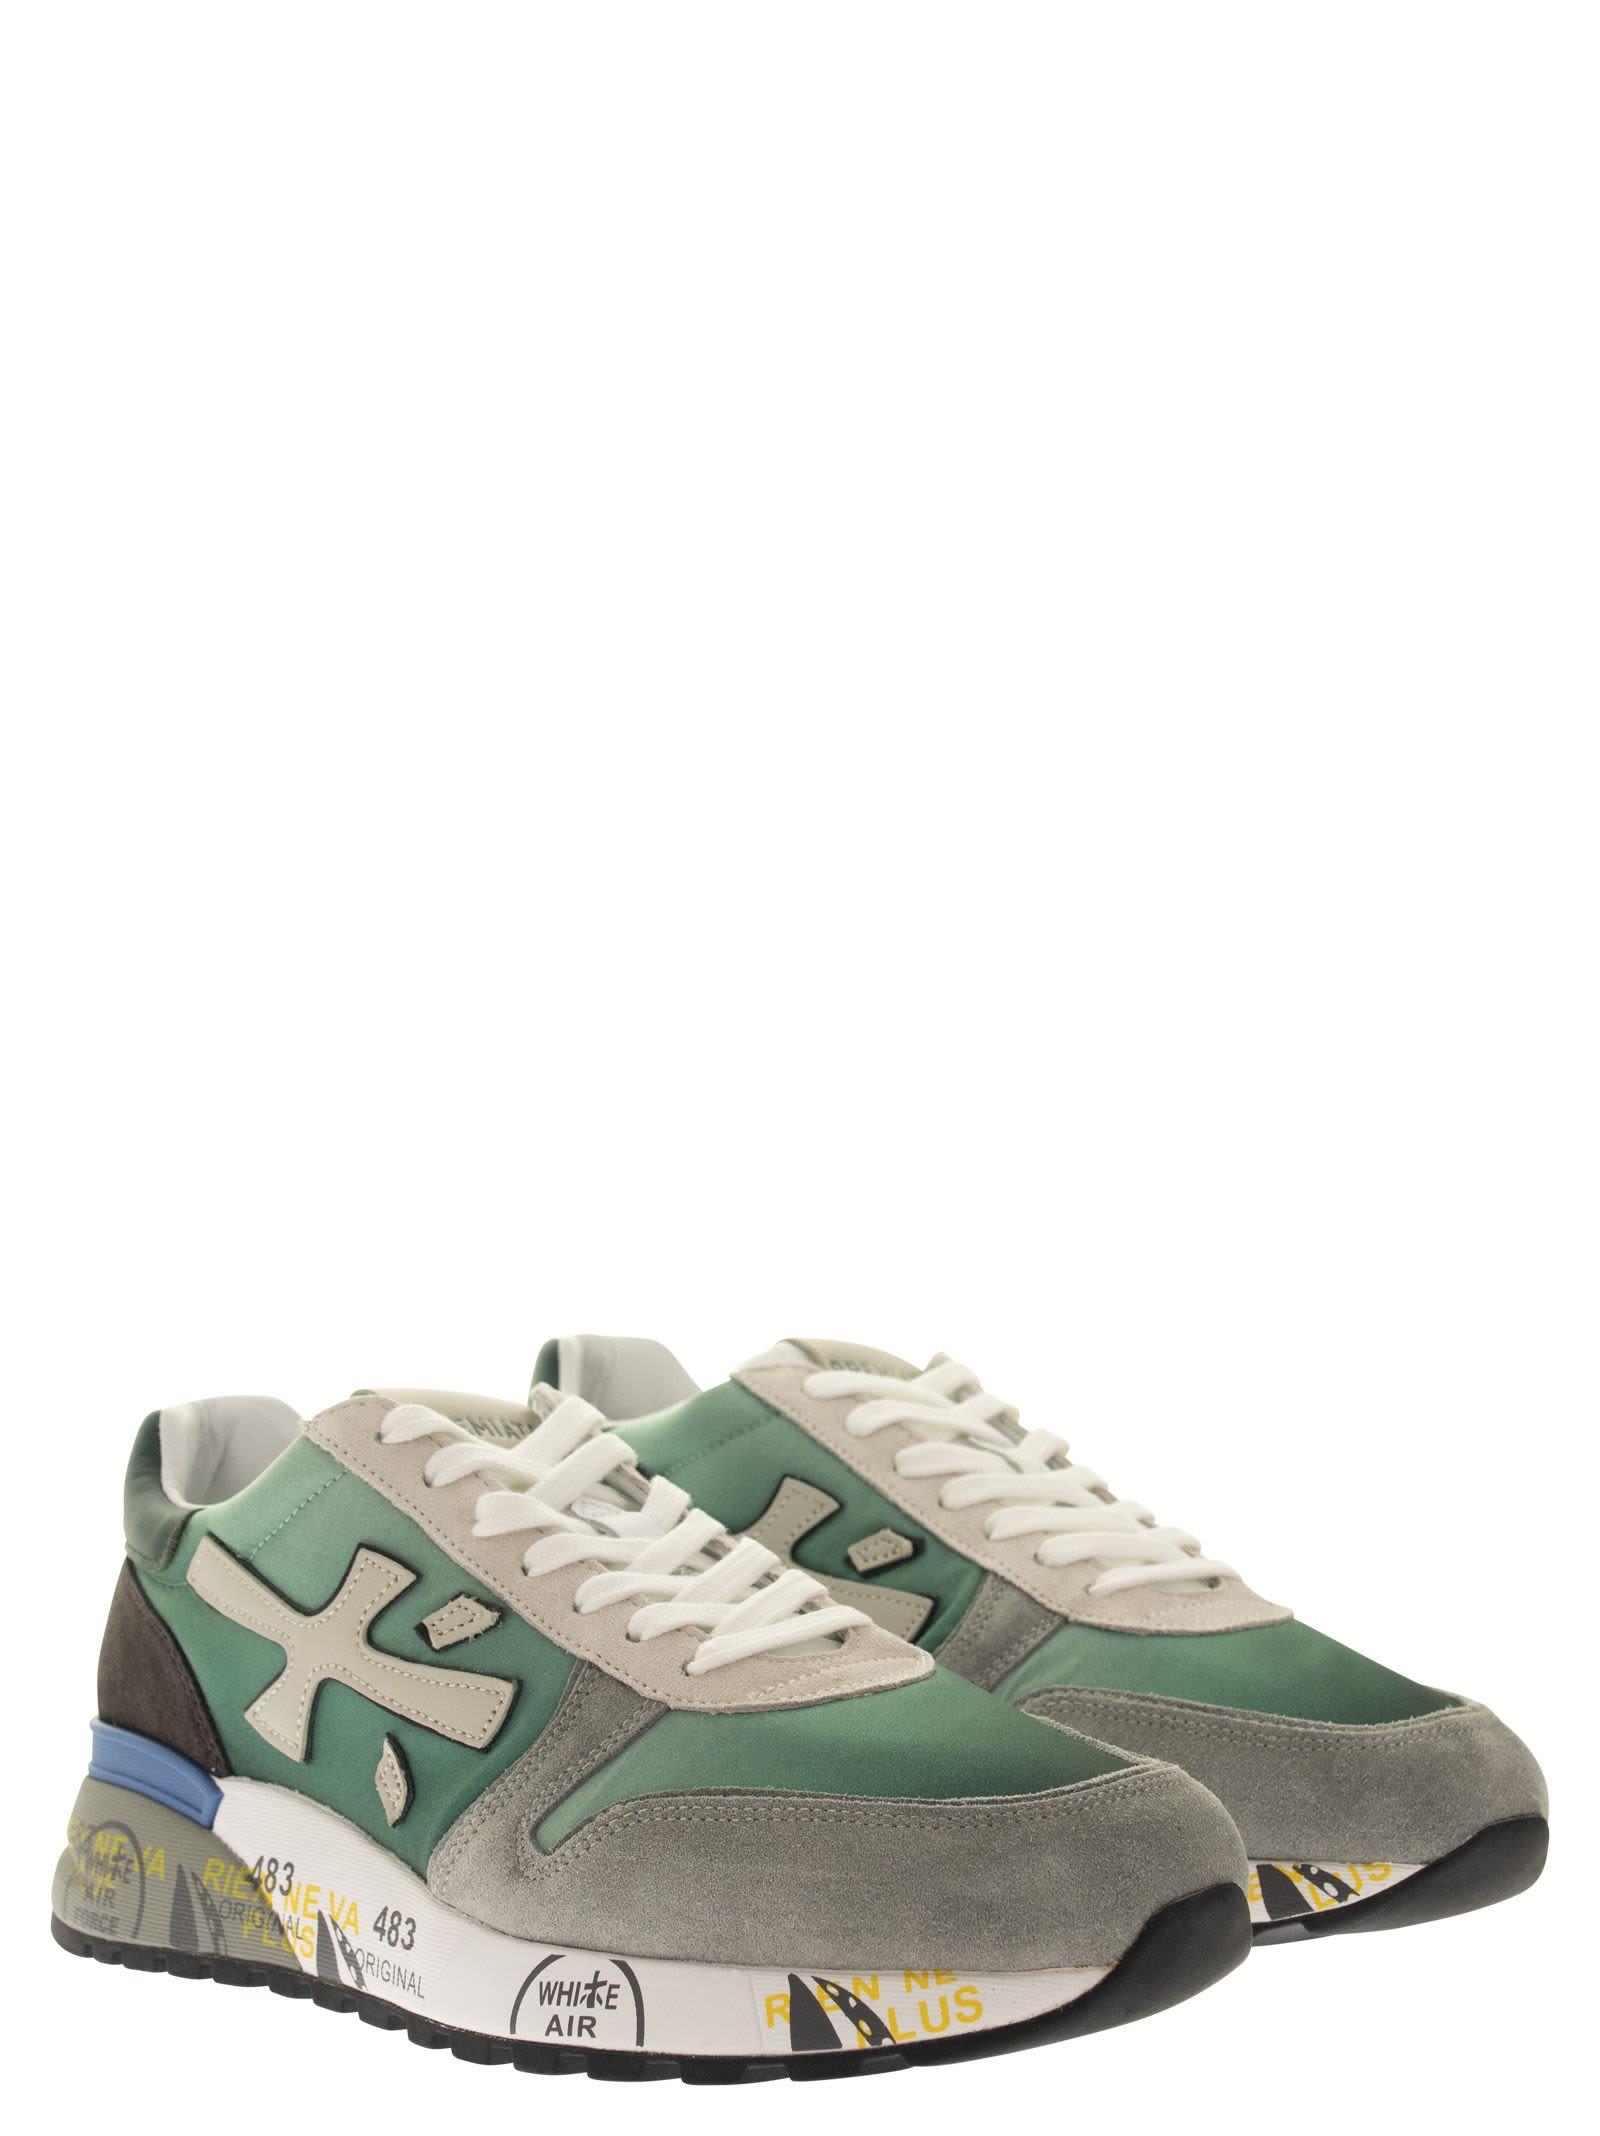 Premiata Leather Mick 5689 - Sneakers in Green/Grey (Green) for Men - Save  19% | Lyst